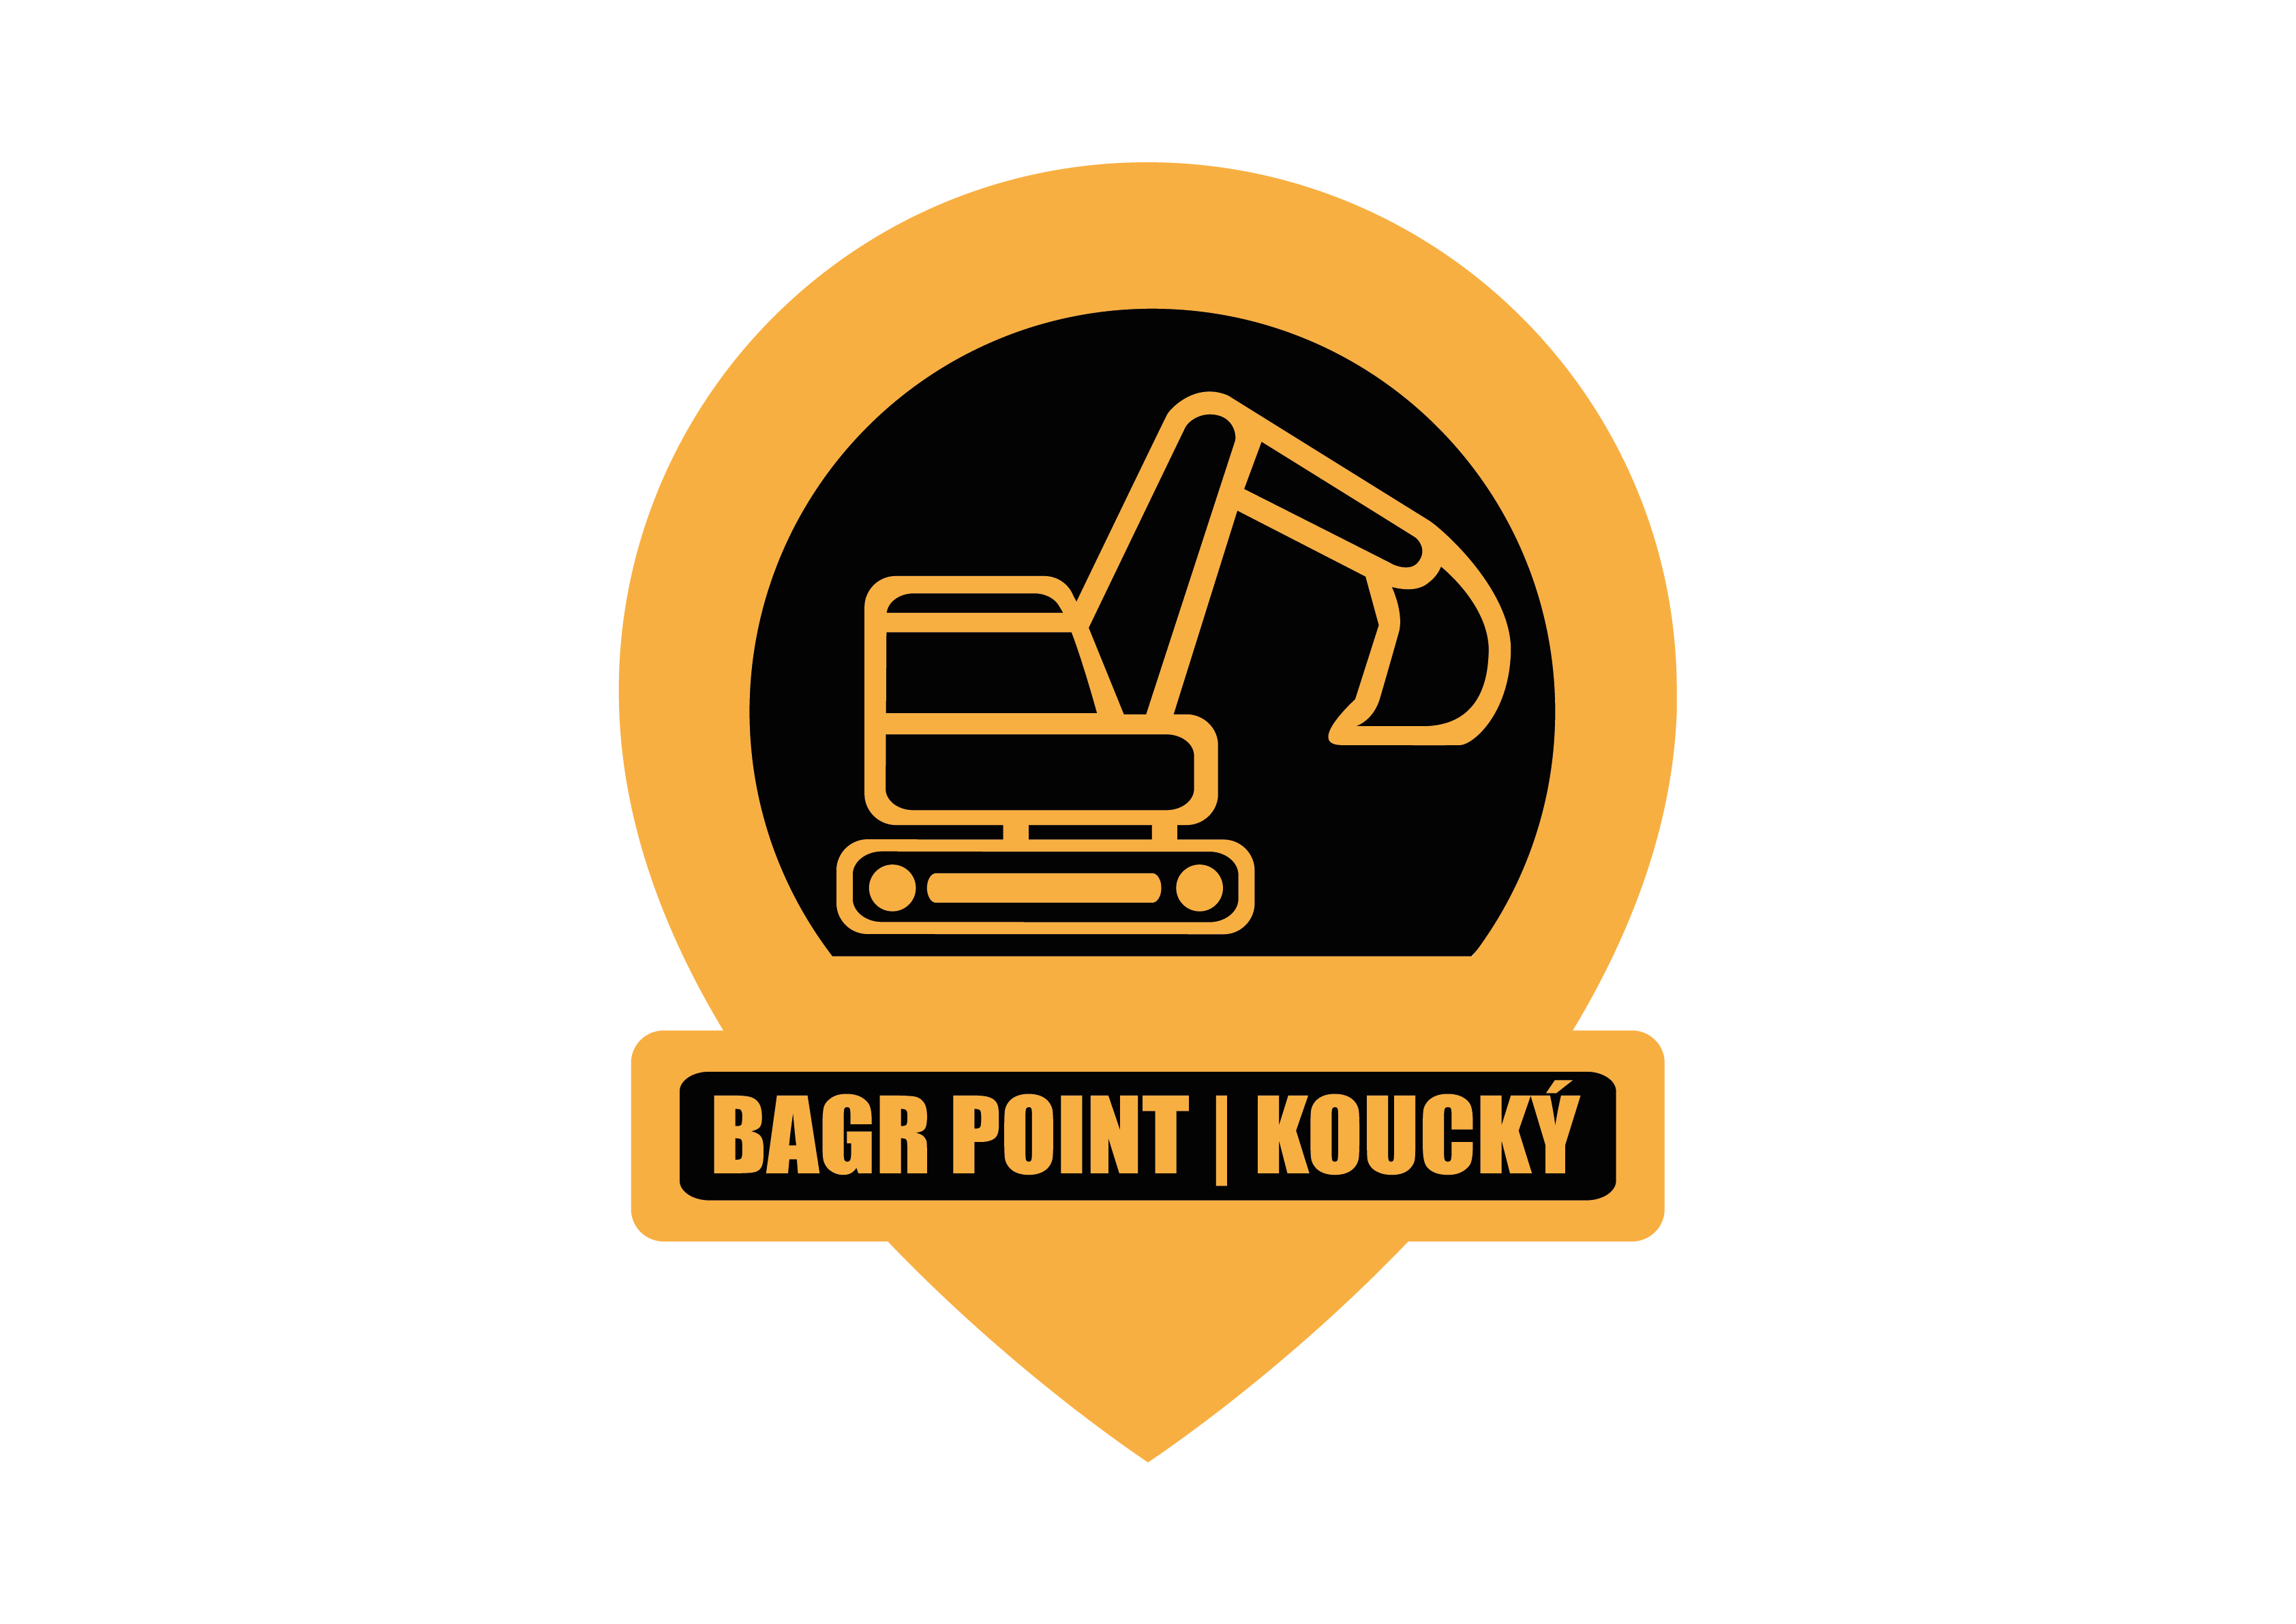 Bagrpoint